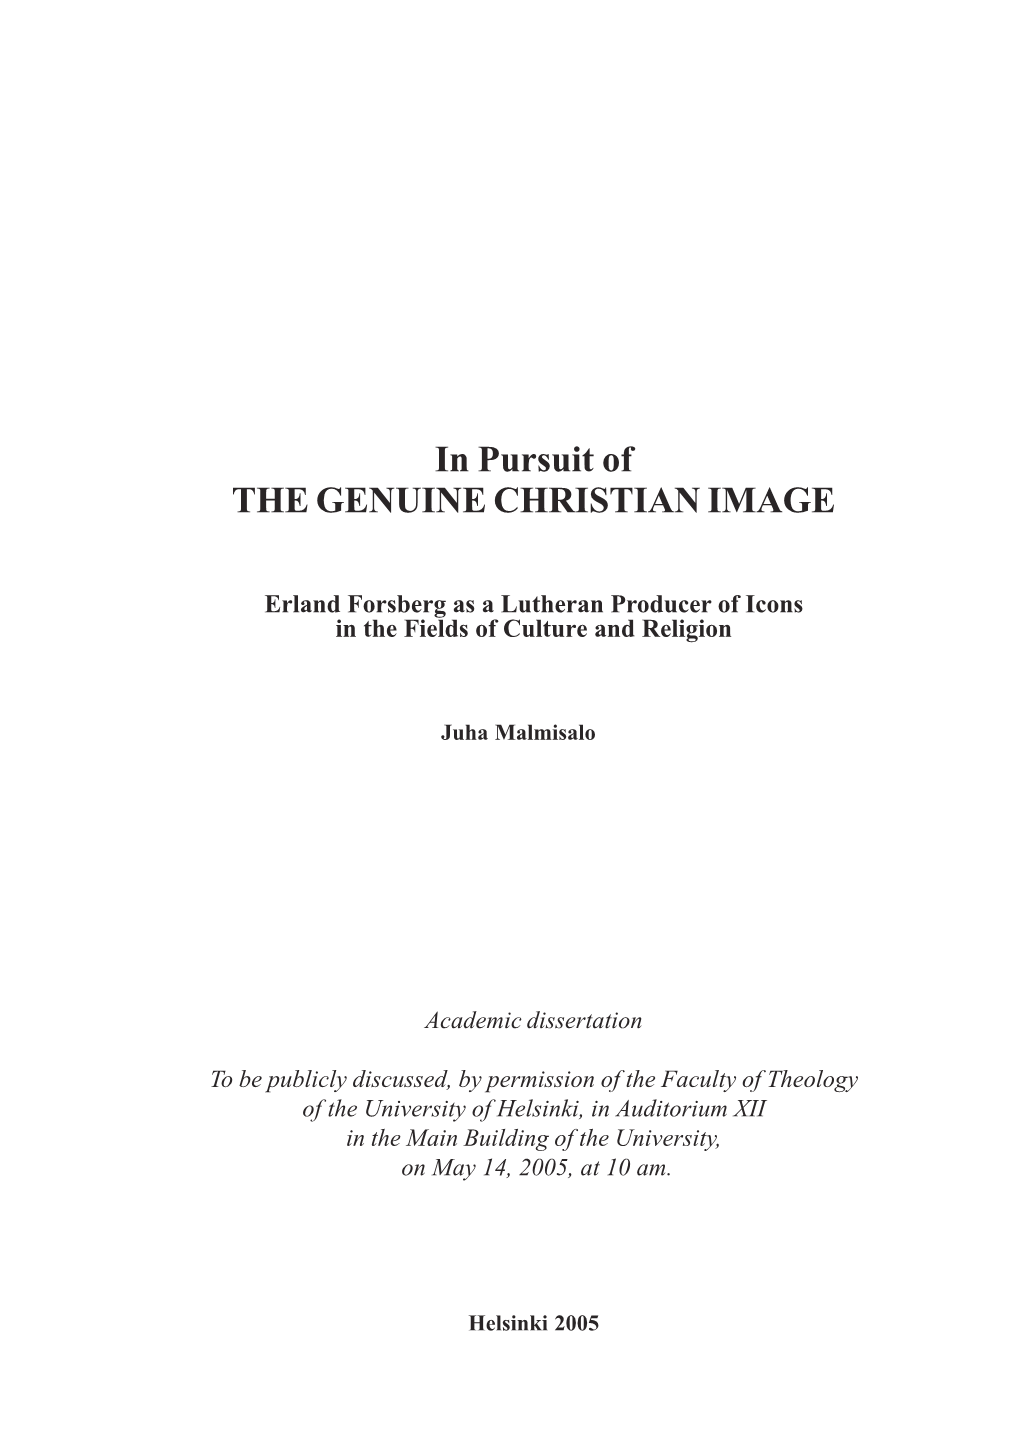 In Pursuit of the GENUINE CHRISTIAN IMAGE